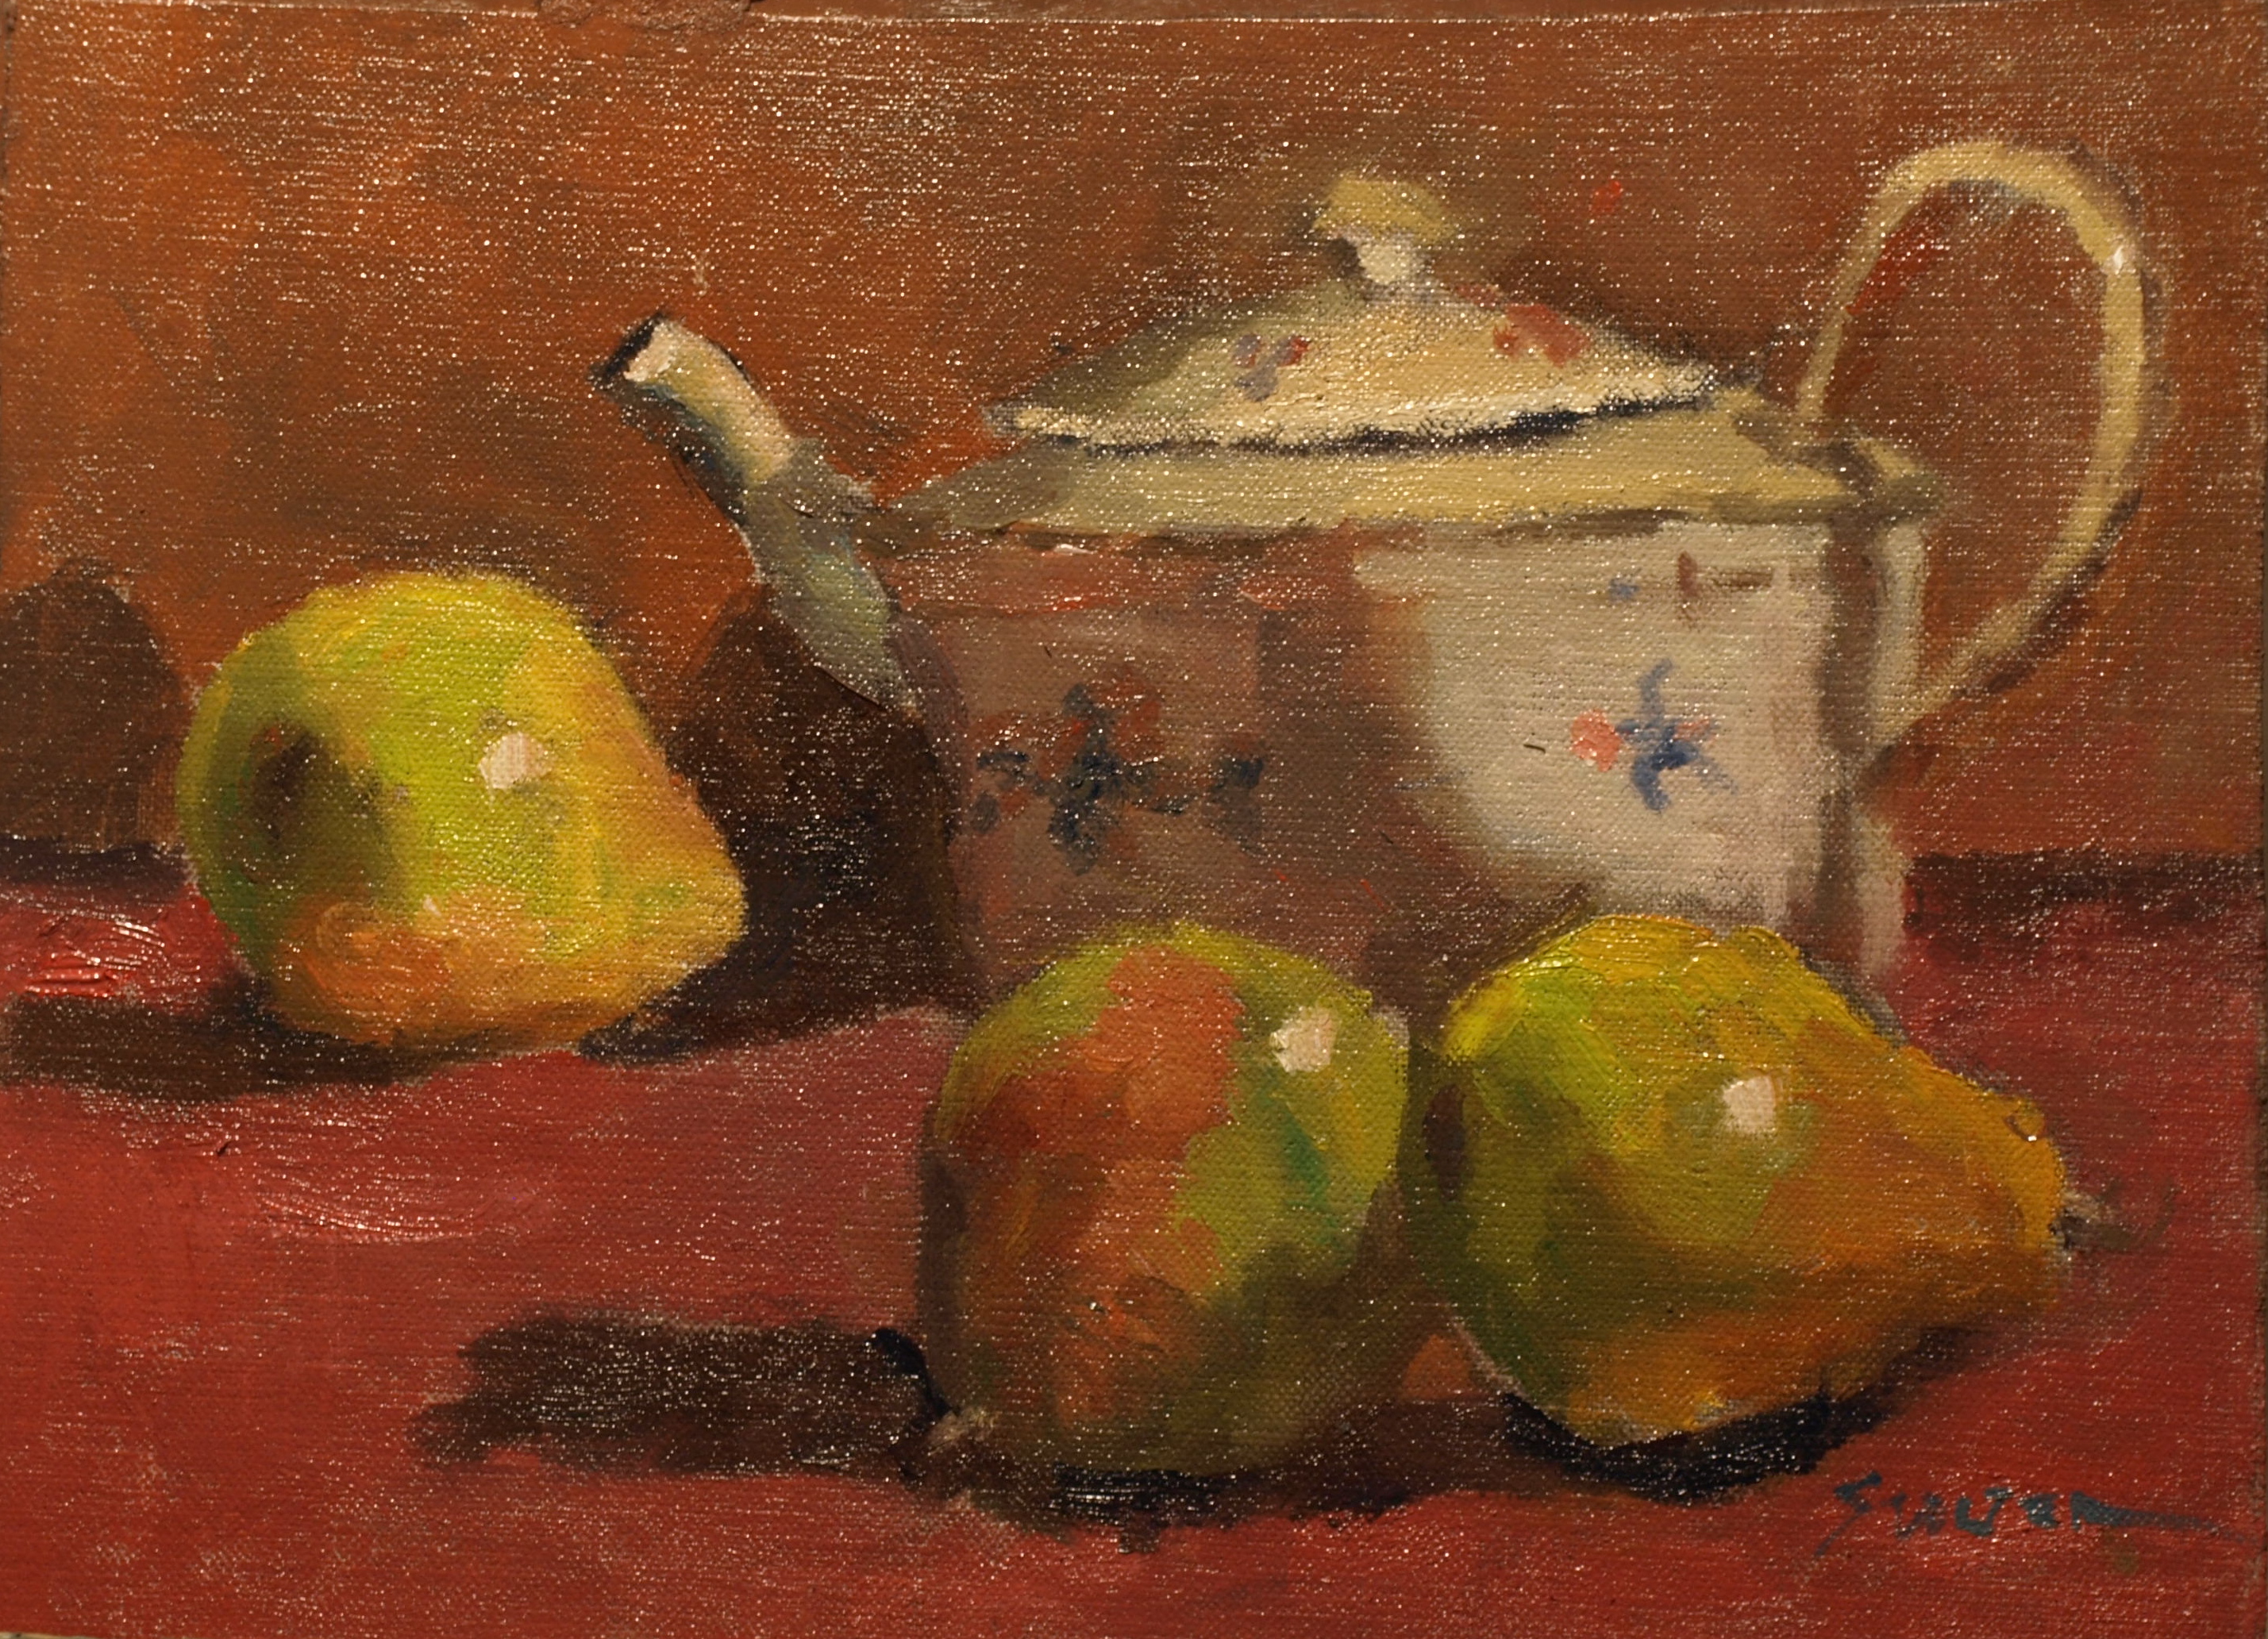 Flowered Teapot, Oil on Canvas on Panel, 9 x 12 Inches, by Richard Stalter, $225